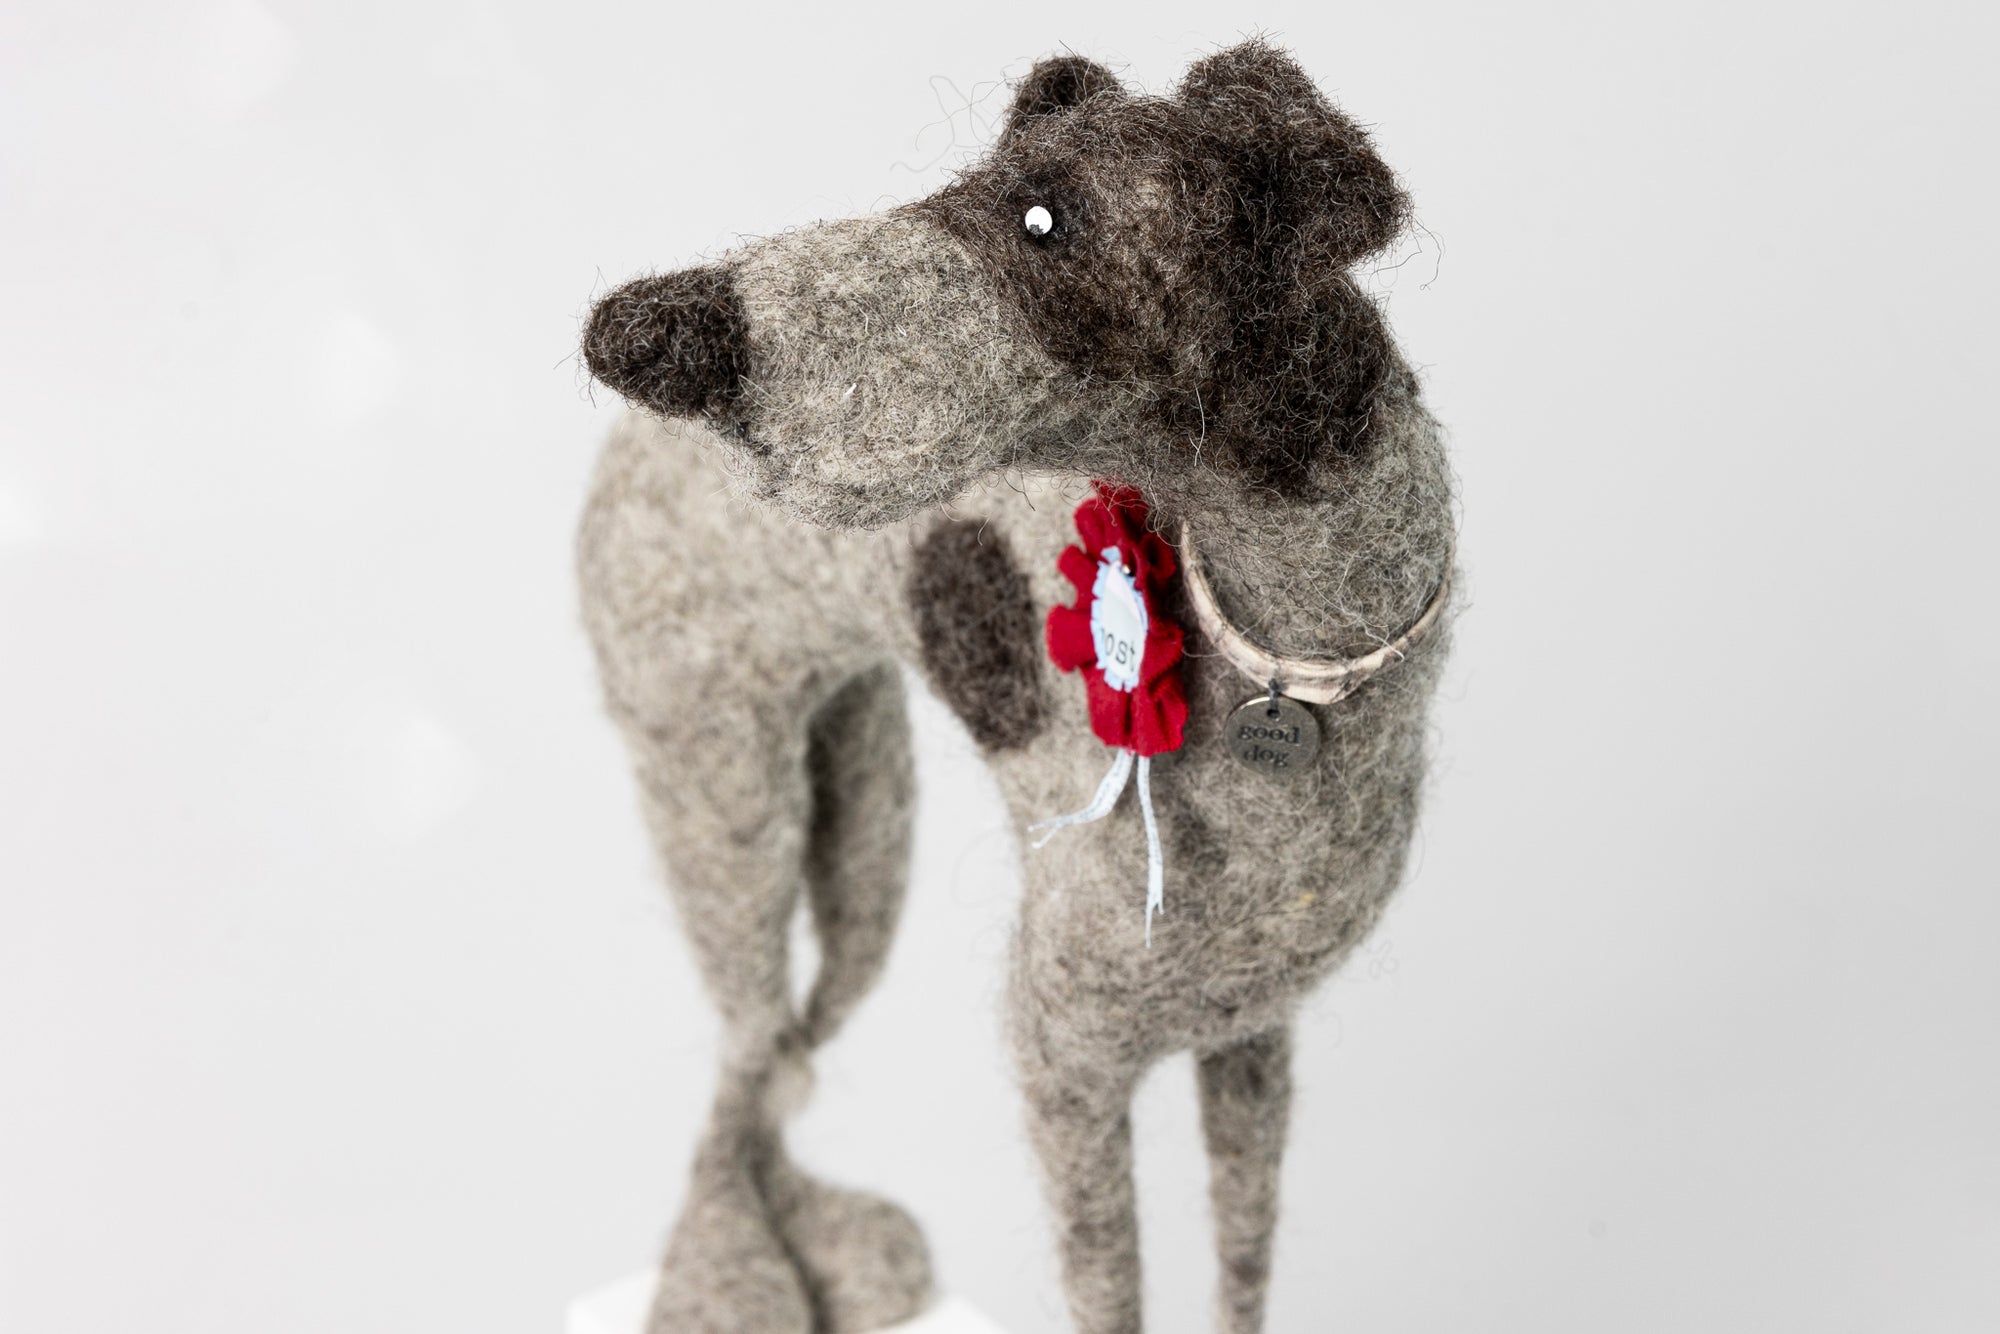 'Bandit' needlefelt character dog by Kate Toms, available at Padstow Gallery, Cornwall